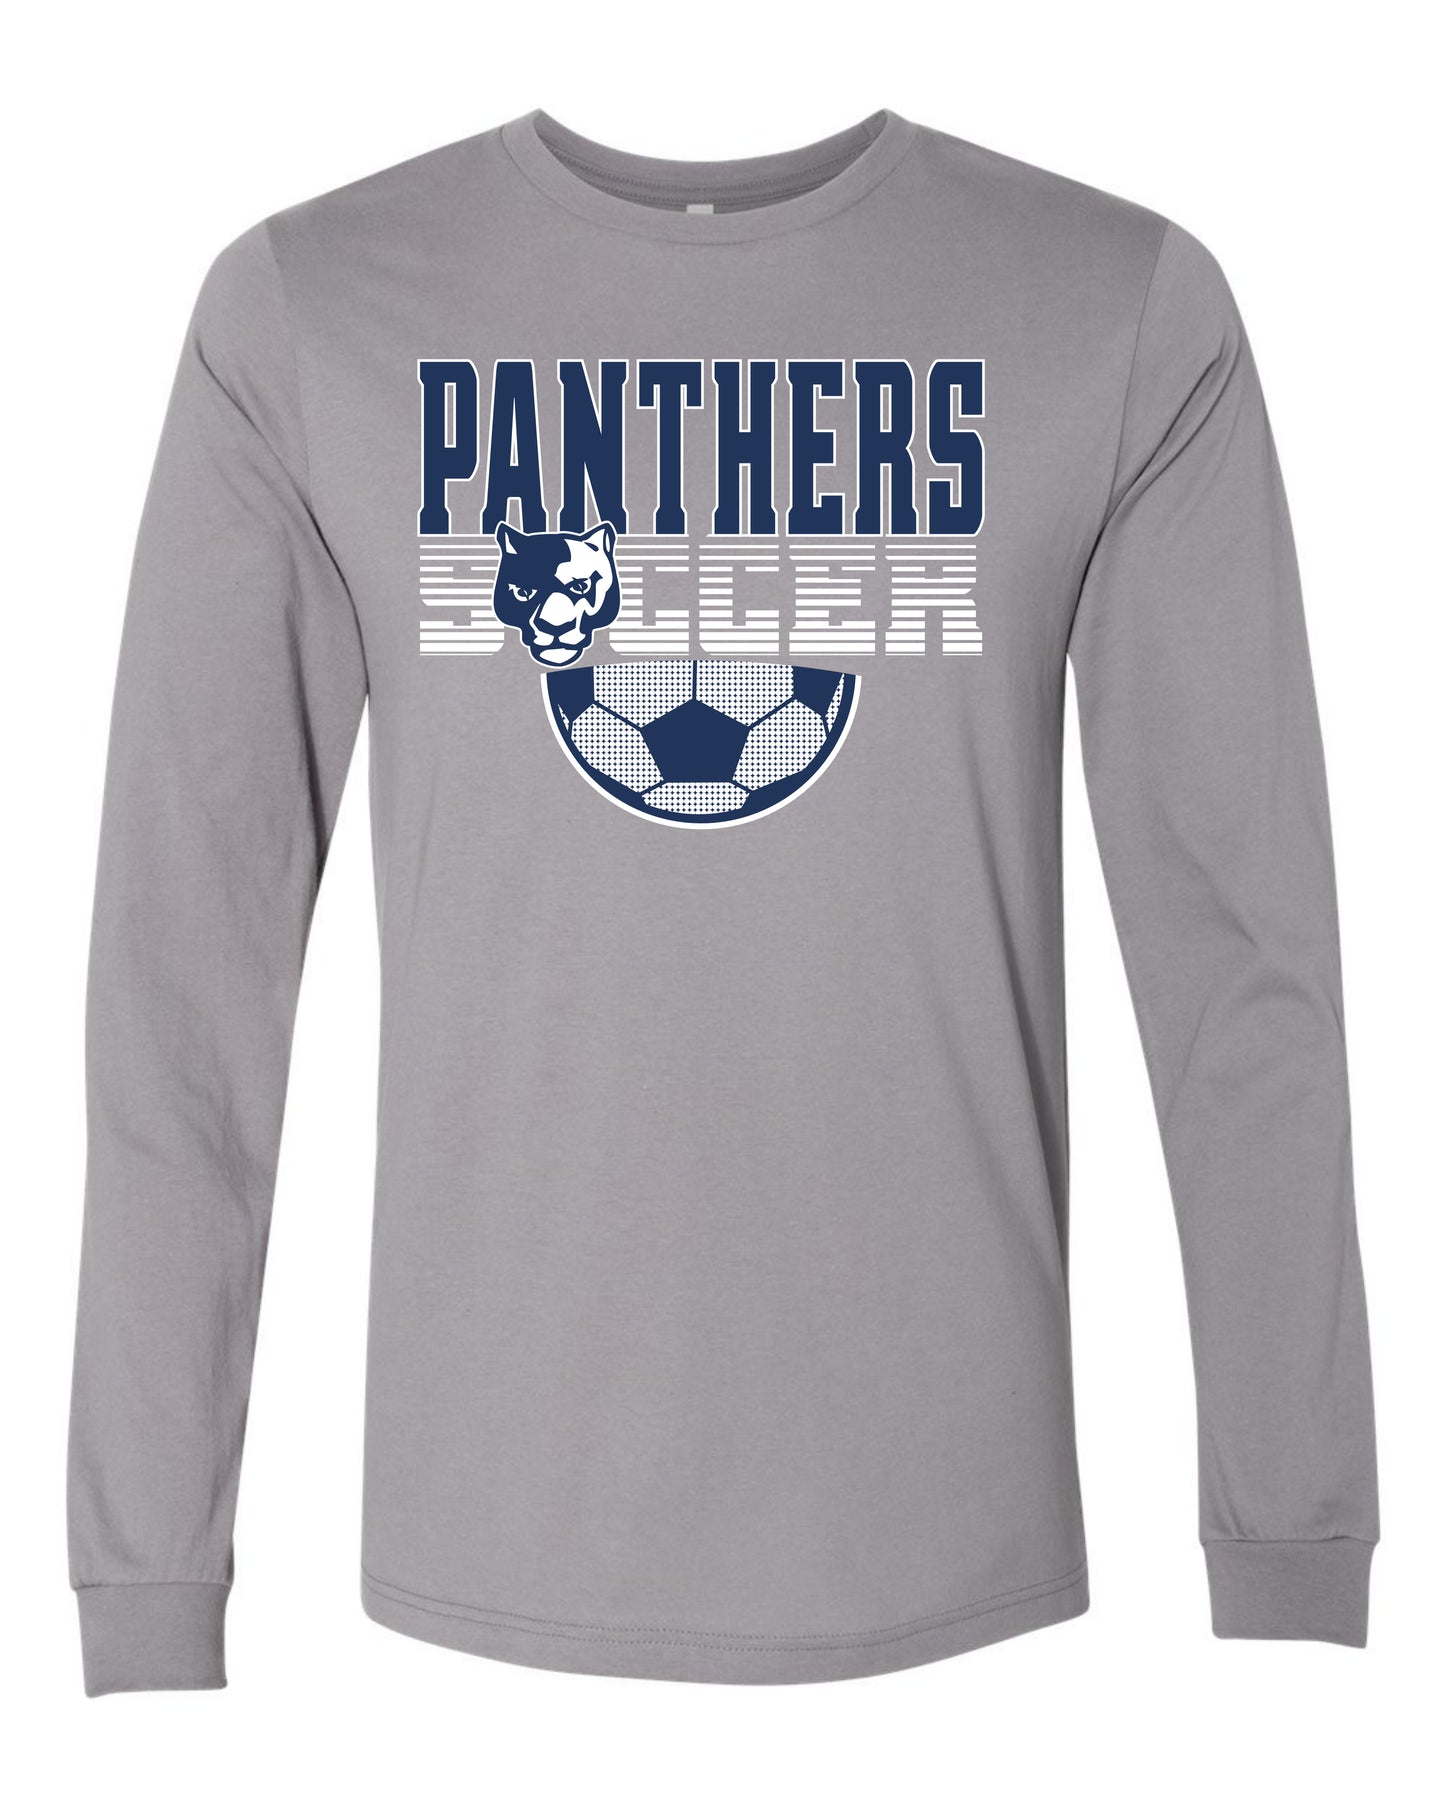 Panthers Soccer Faded - Adult Long Sleeve